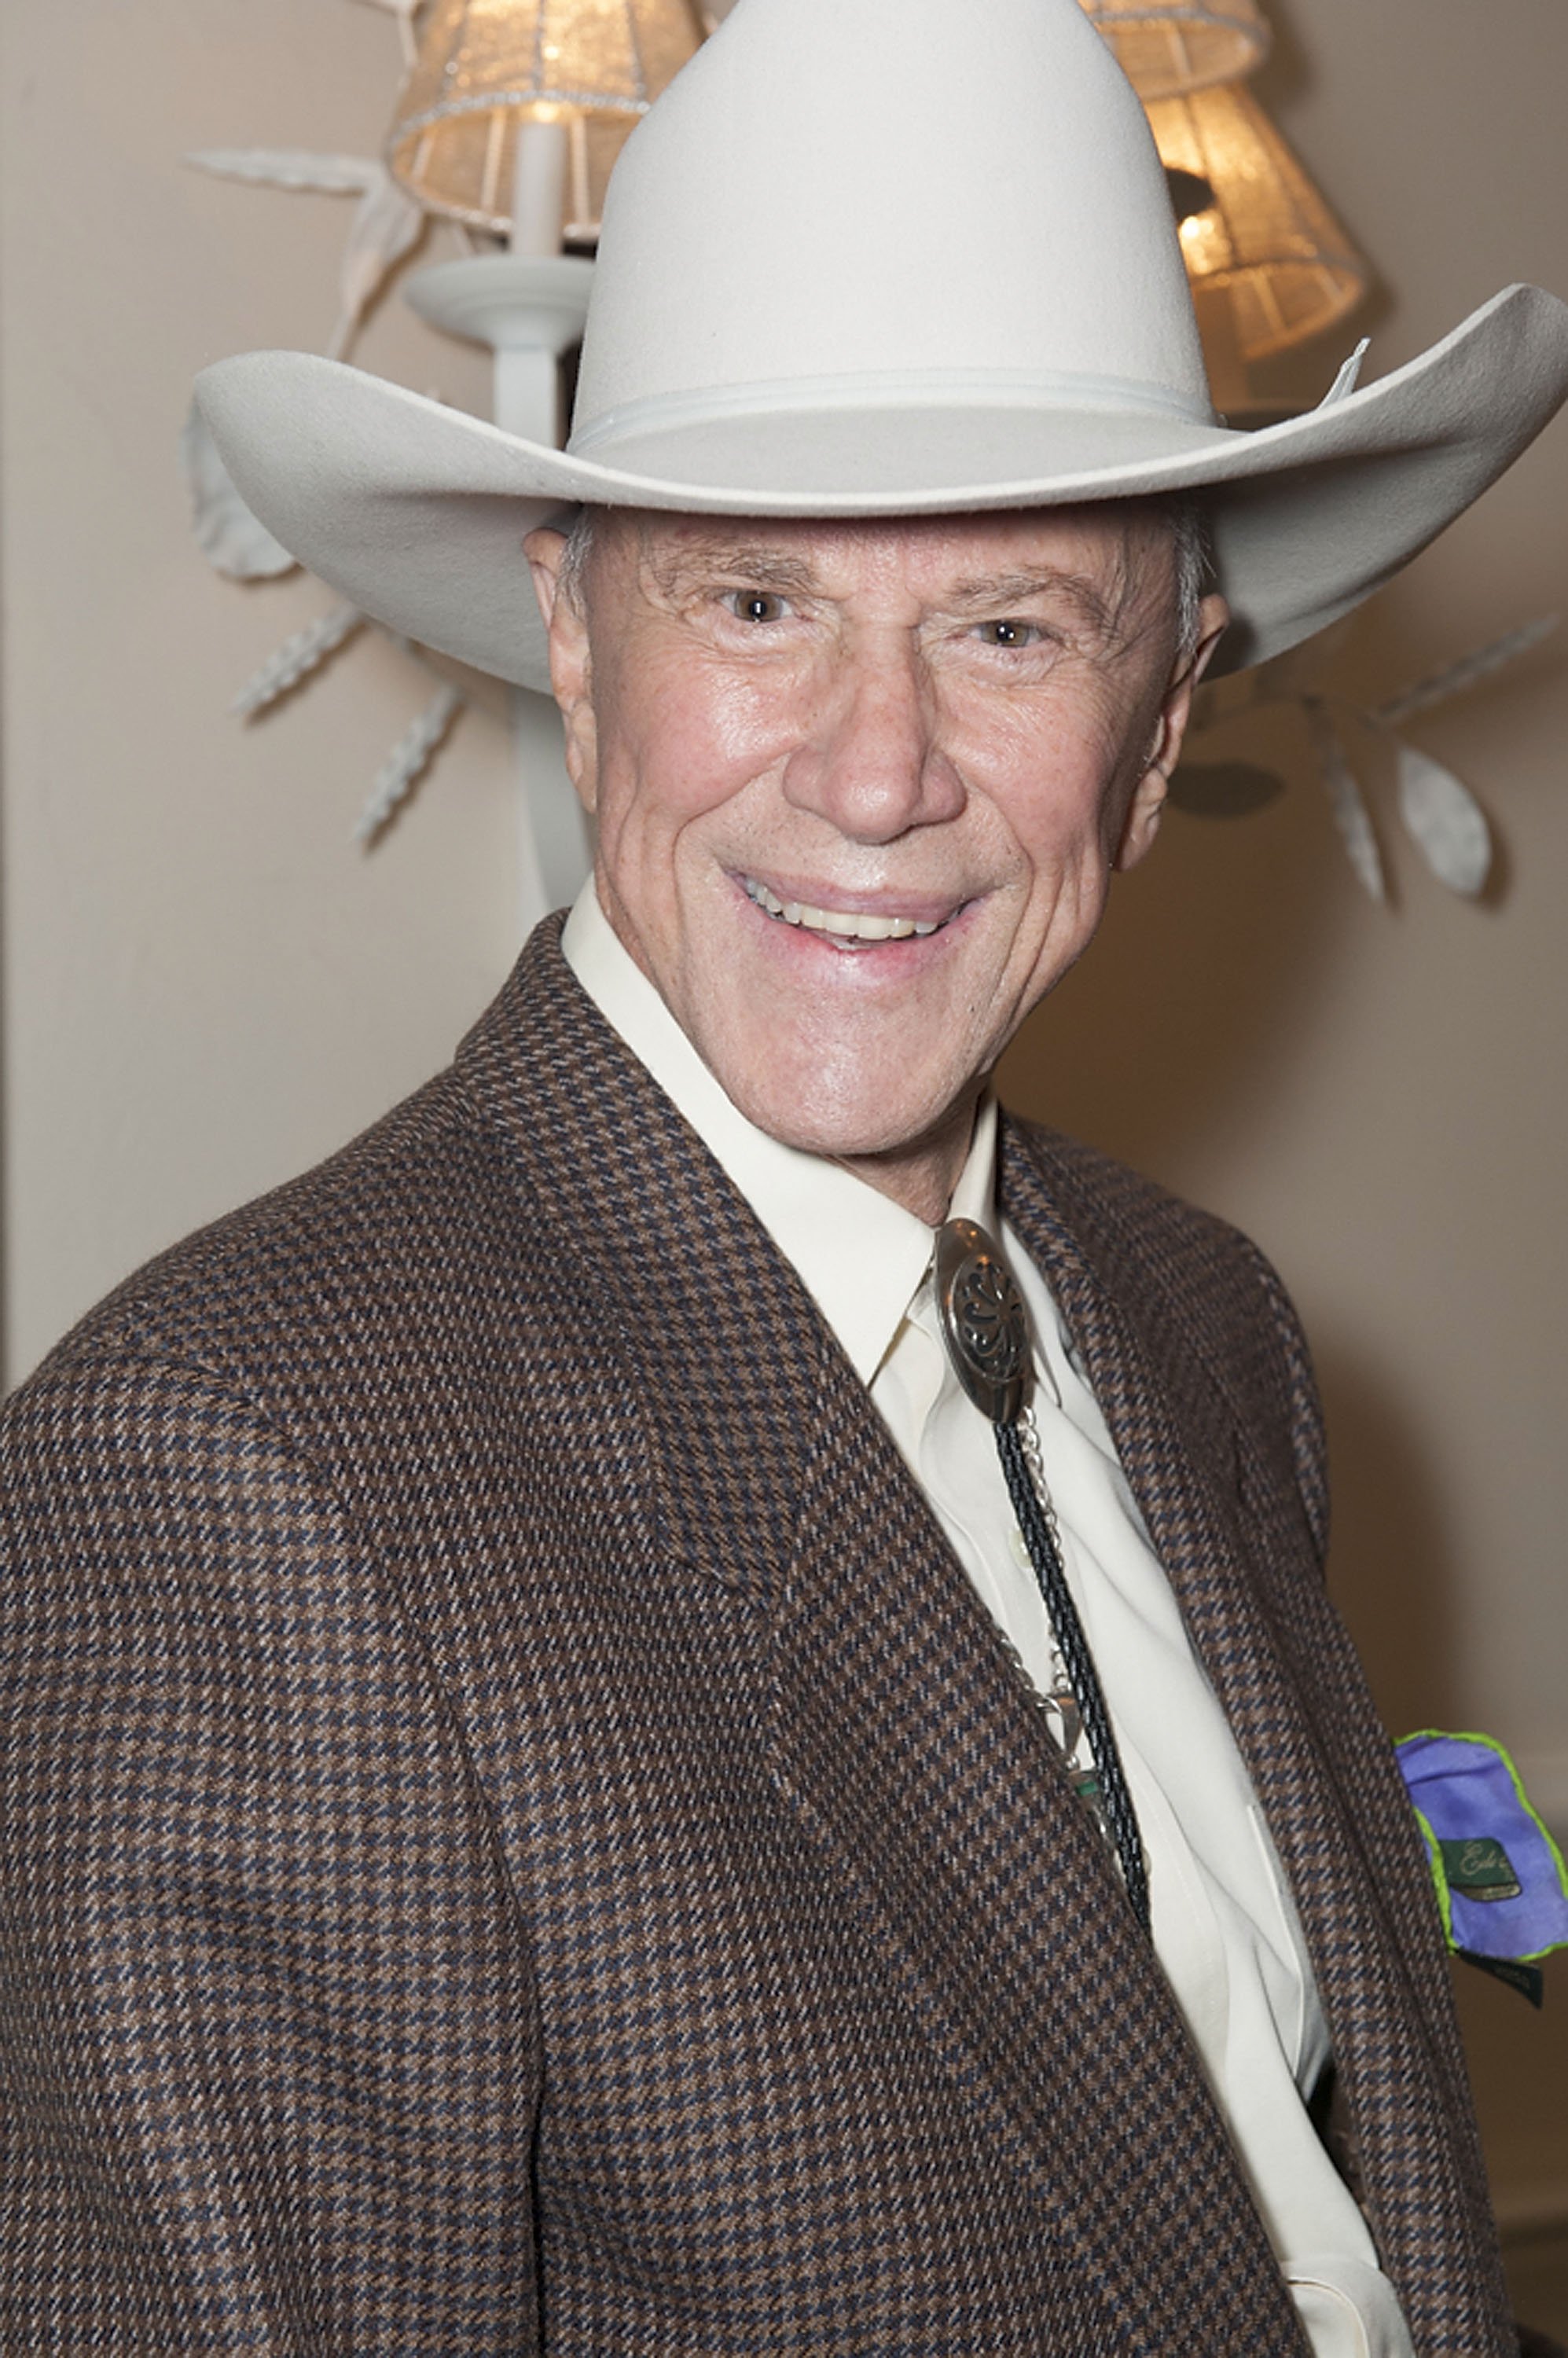 Actor Andrew Prine attends the 16th Annual Silver Spur Awards hosted by The Reel Cowboys at The Sportsman's Lodge on September 27, 2013 in Studio City, California. | Source: Getty Images